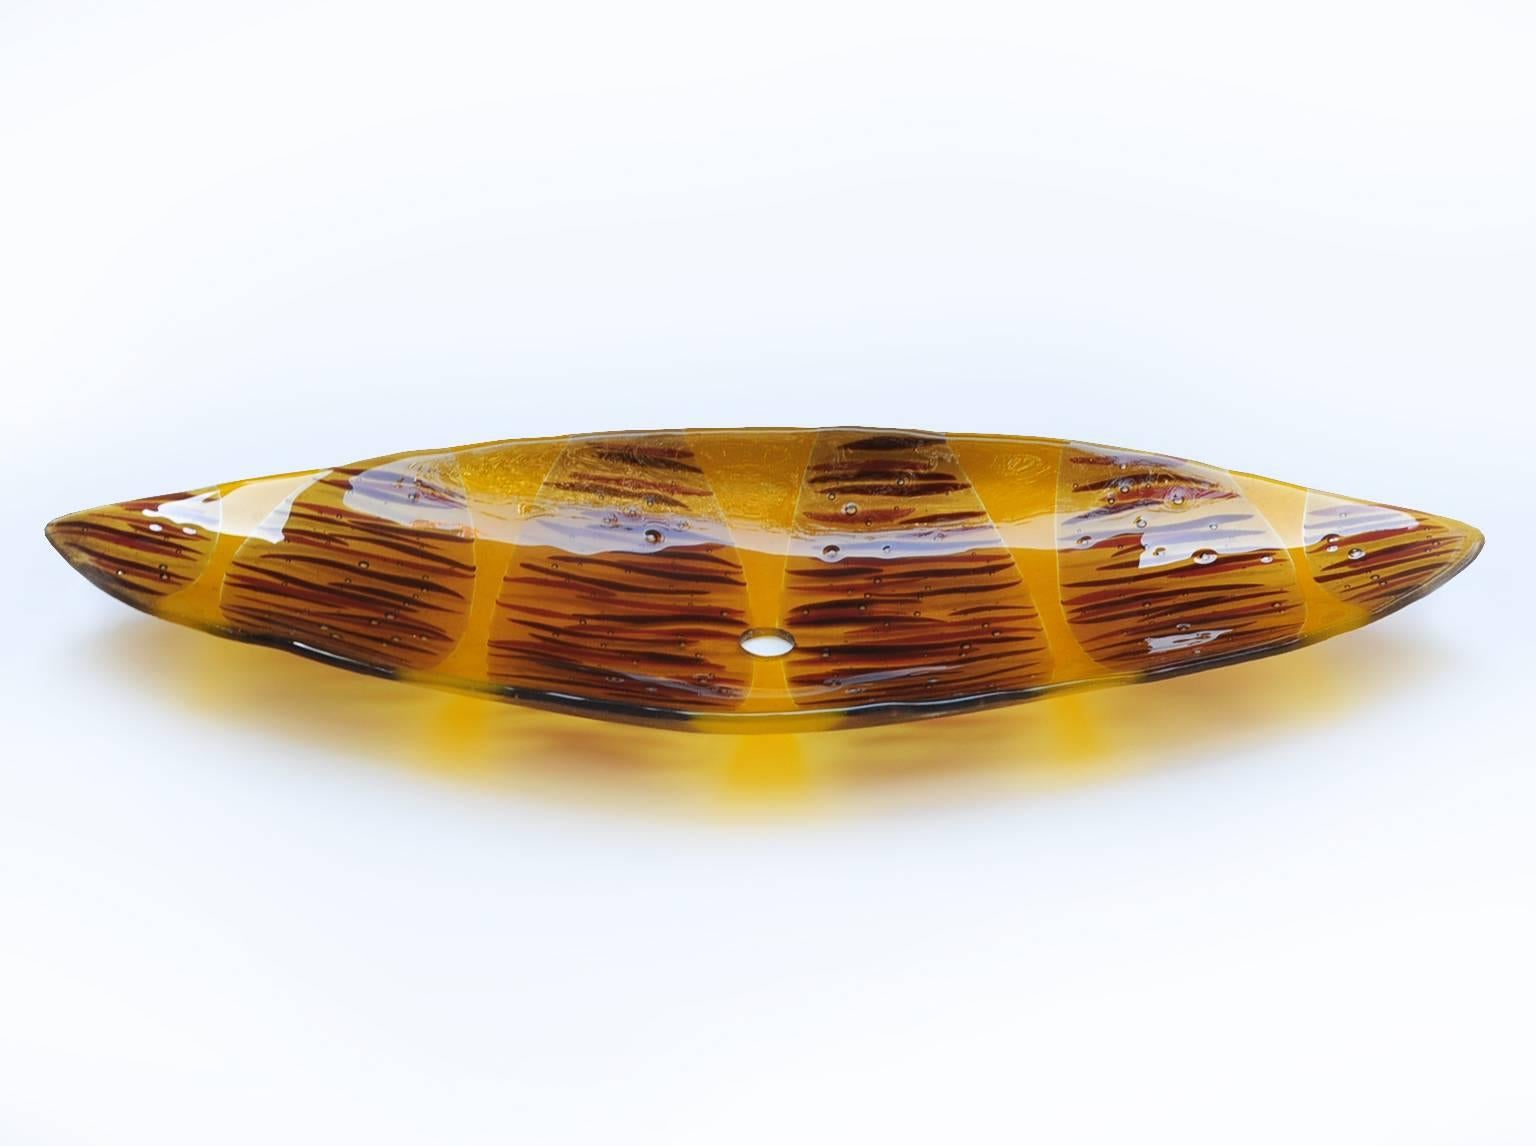 American Glass Dish with a Hole at the Centre For Sale